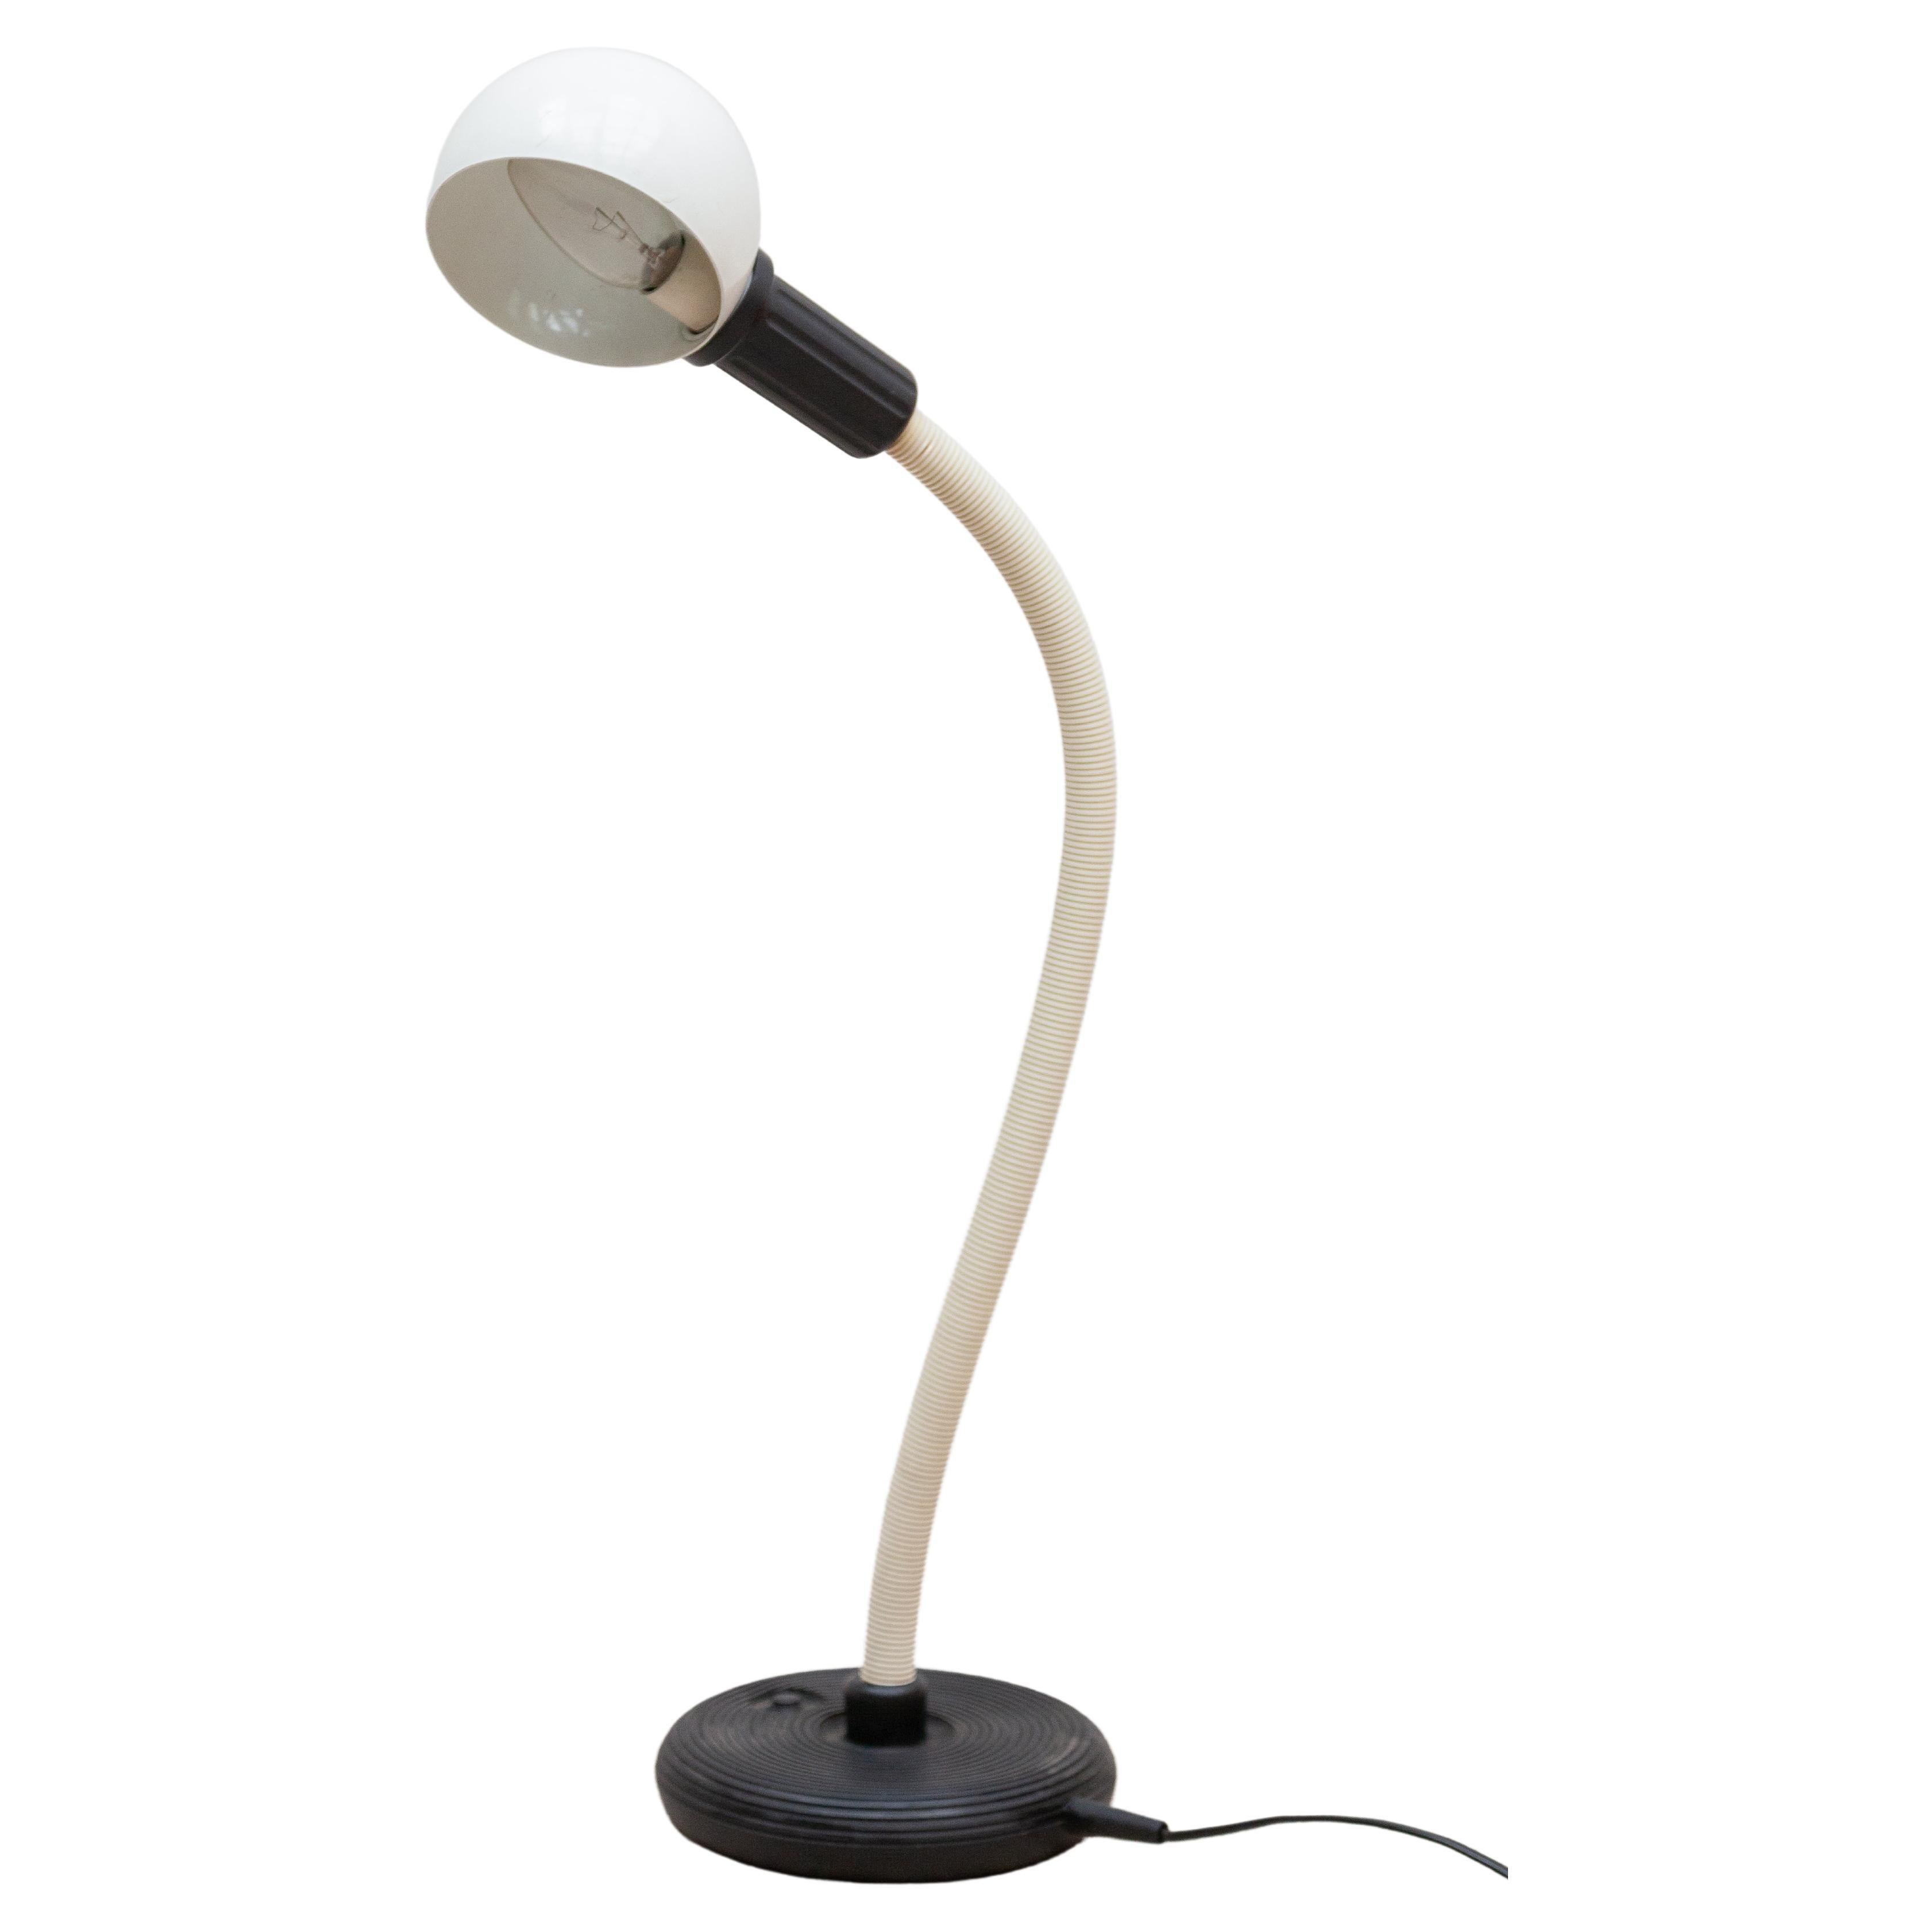 Adjustable 'Hebi' desk lamp by Isao Hosoe for Valenti in Milano, Italy 1970s. In good original condition. Black ribbed rubber base with a metal counterweight inside. Black ribbed flexible tube with a metal gooseneck inside. White painted aluminium